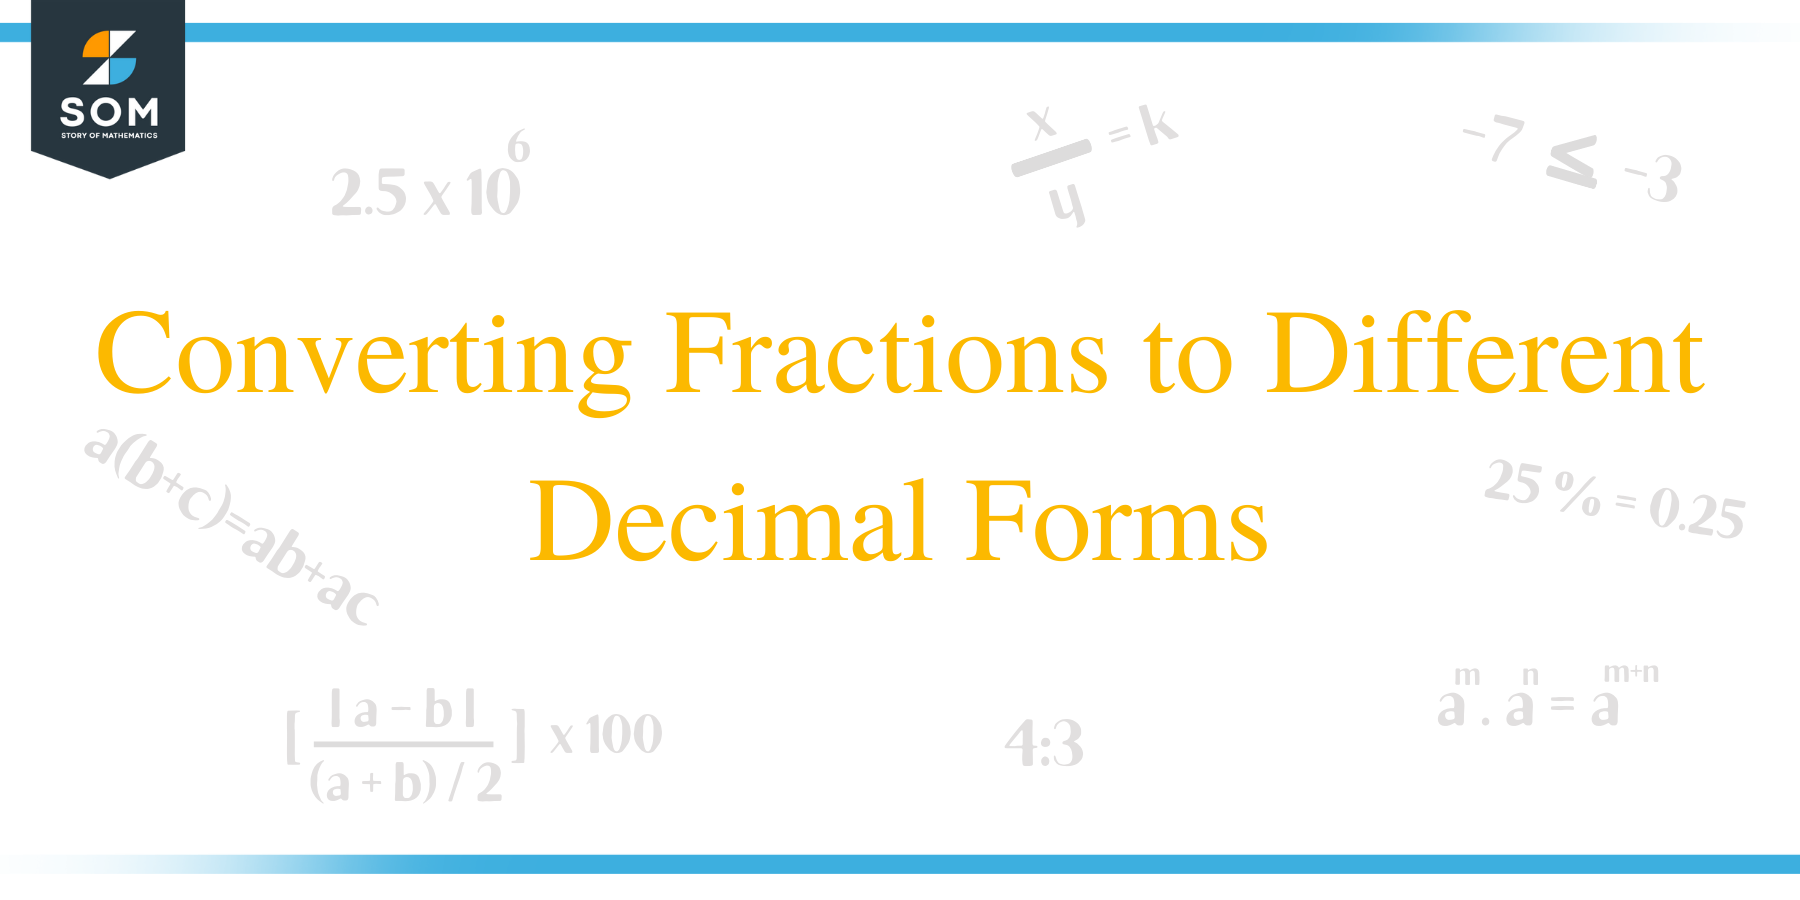 Converting Fractions to Different Decimal Forms